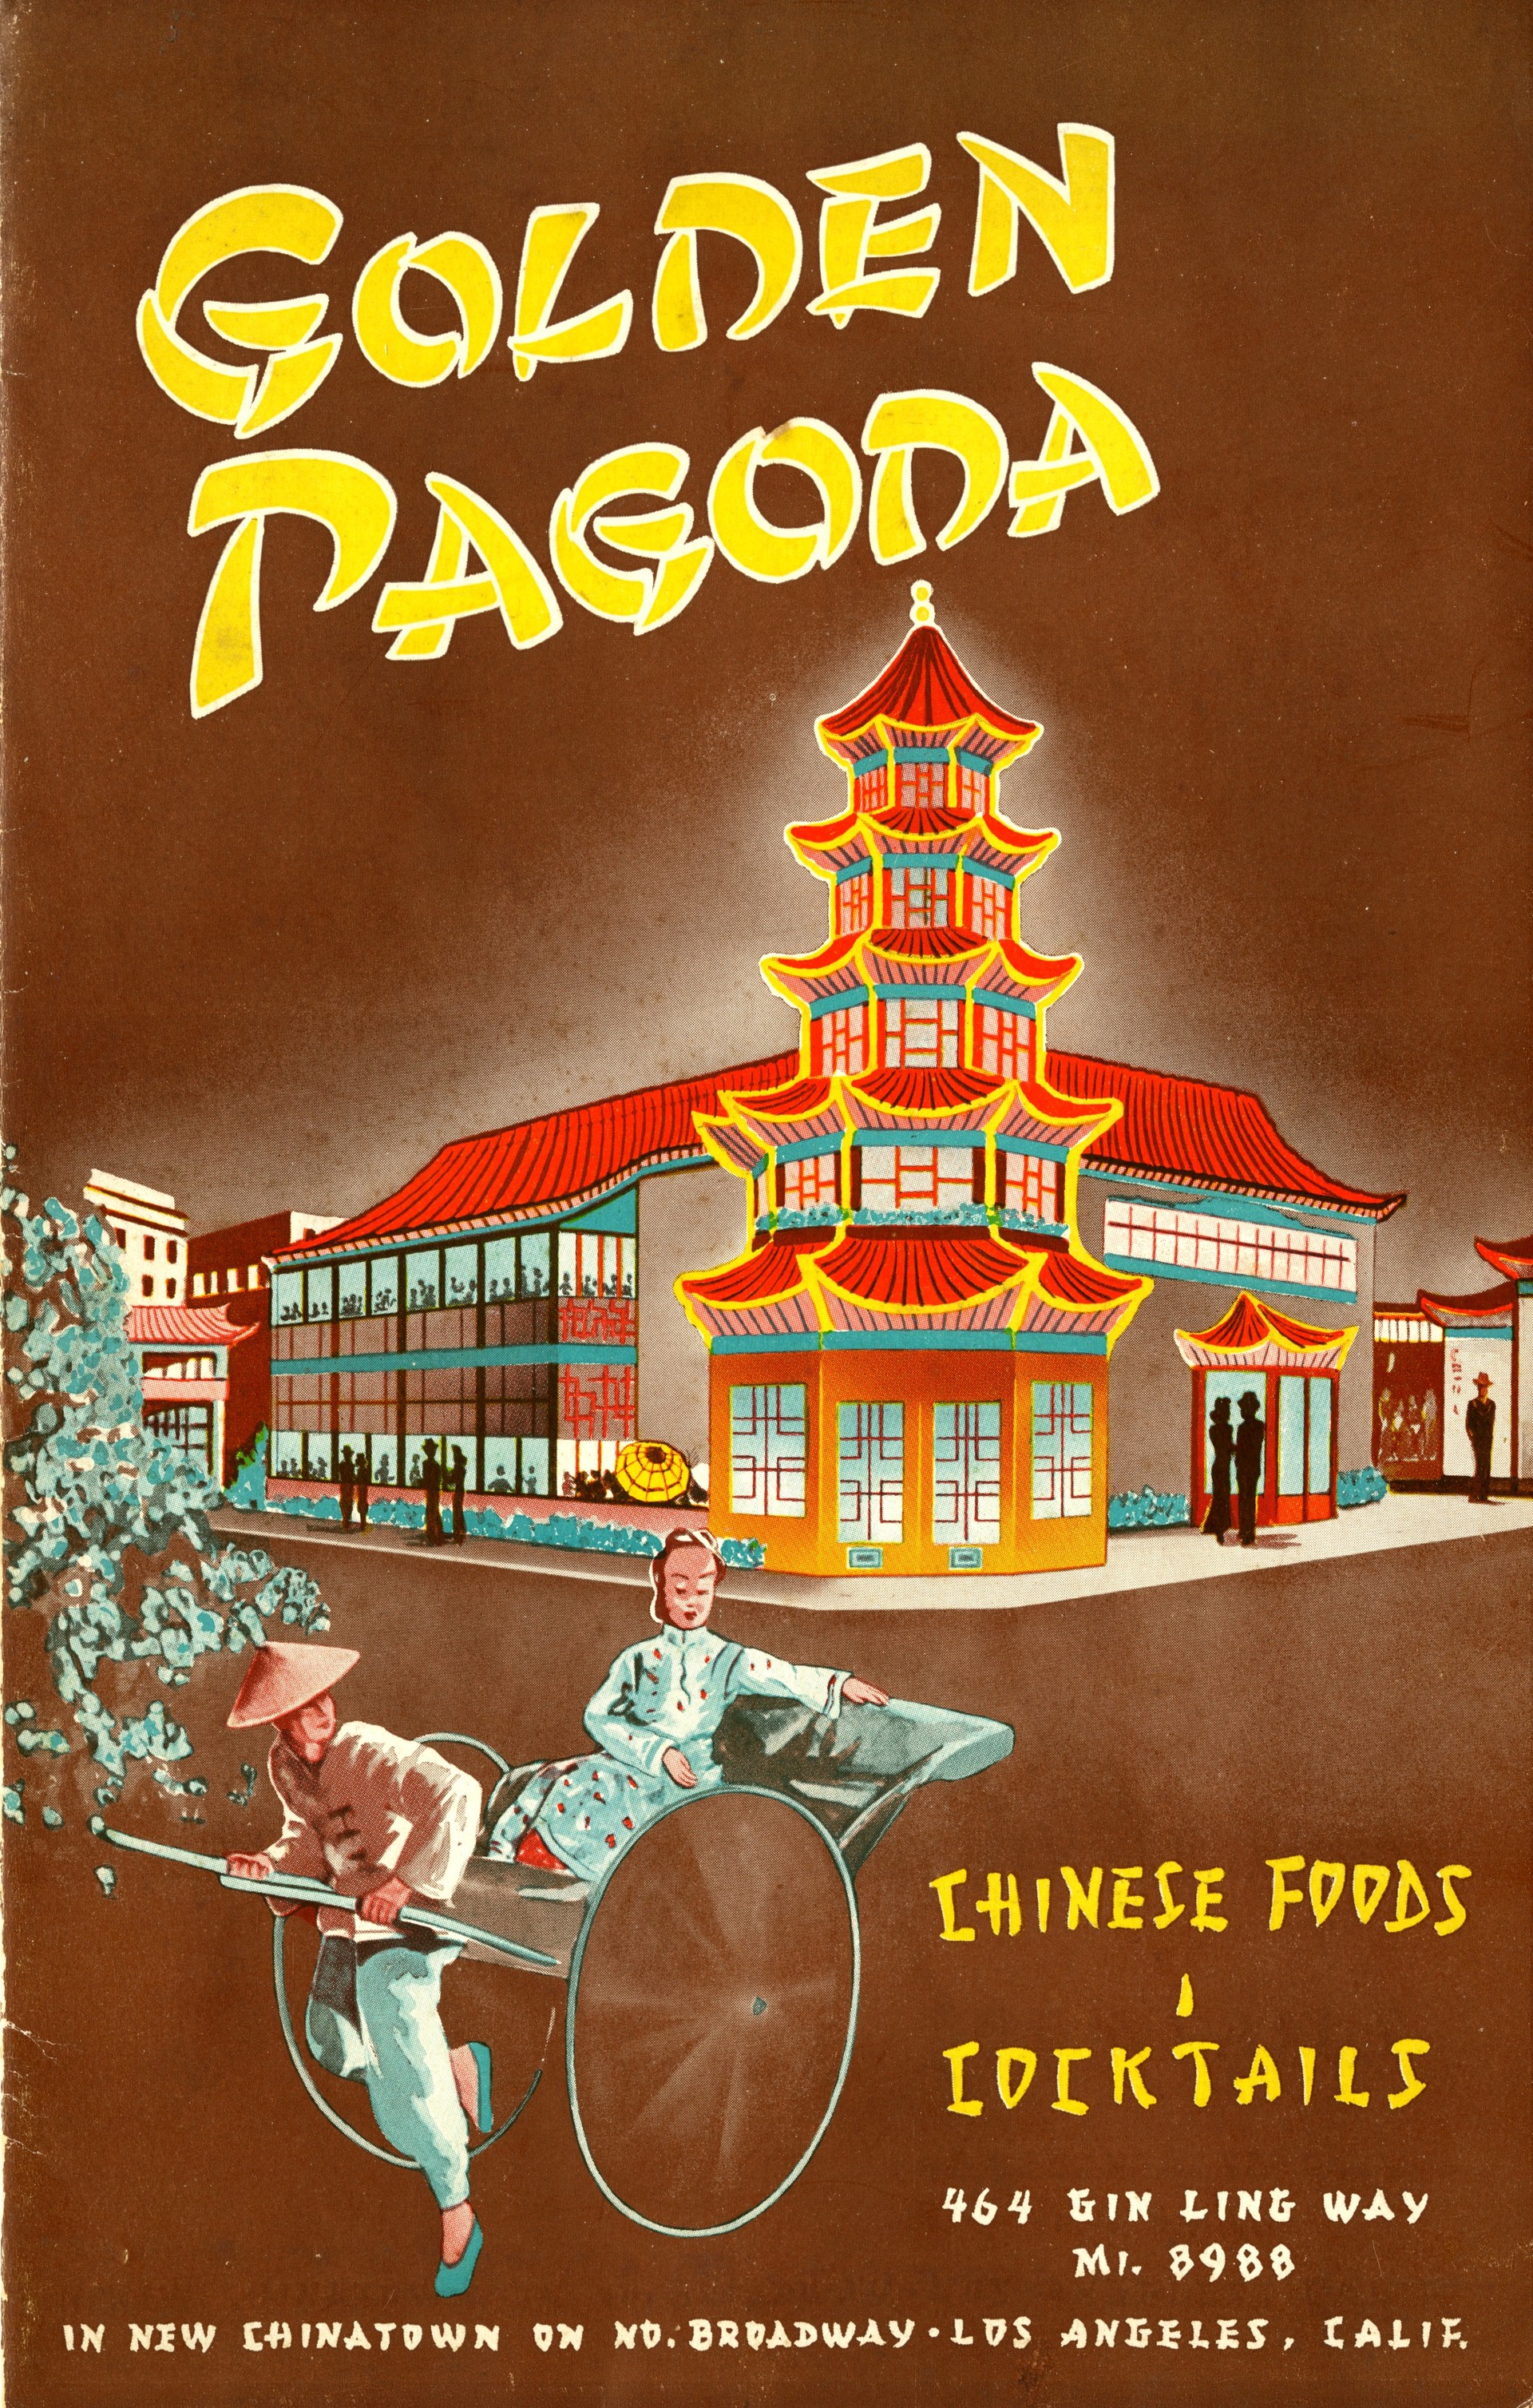 Menu cover from the Golden Pagoda restaurant.